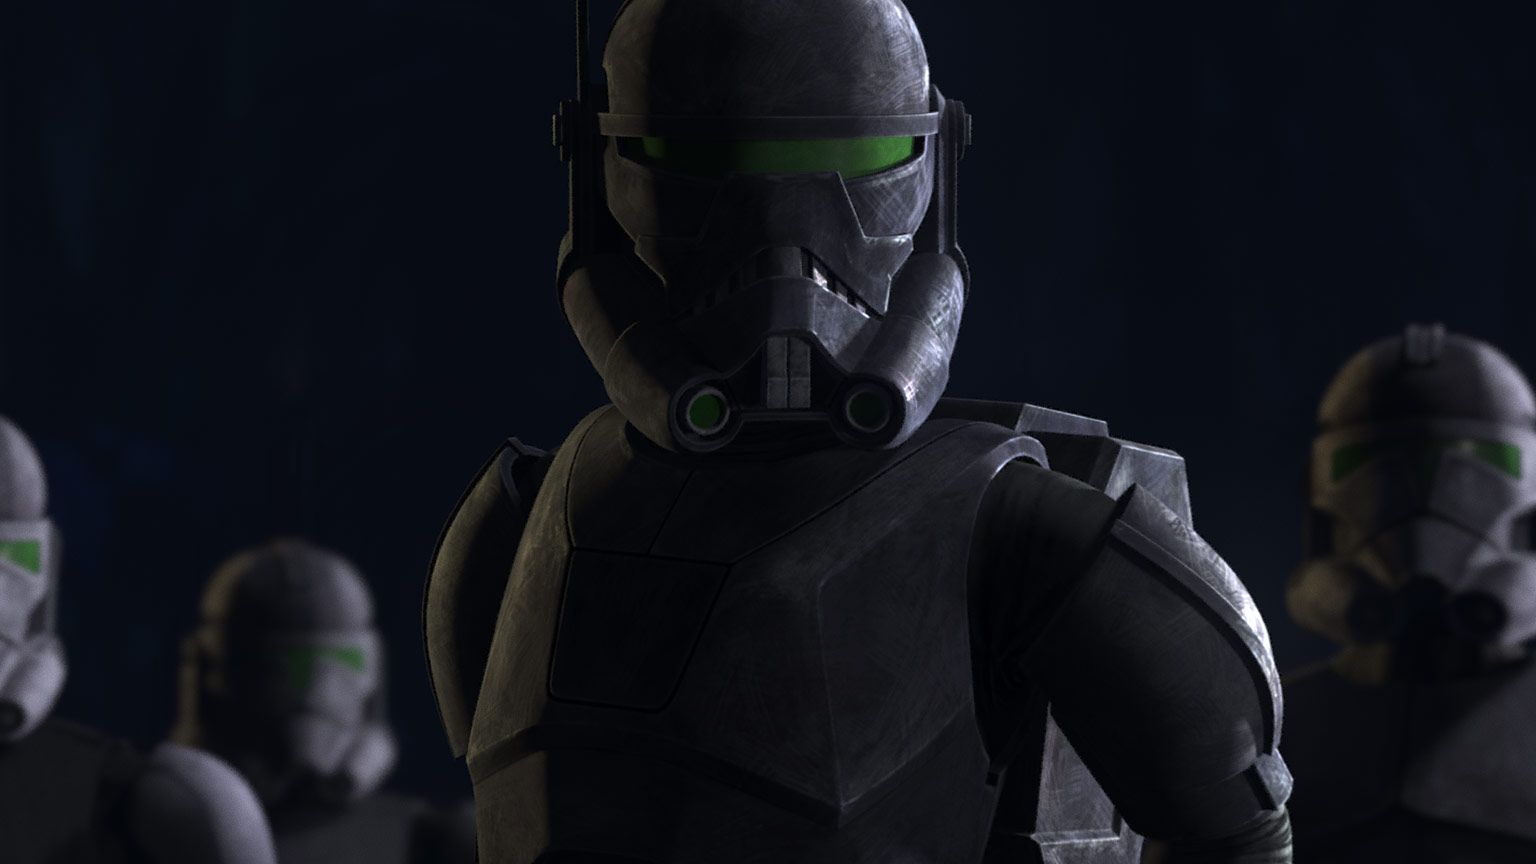 Crosshair, now in his Imperial Special Forces uniform, stands in front of his new squad of troopers. He stands menacingly, as a shadow covers half of his helmeted face.